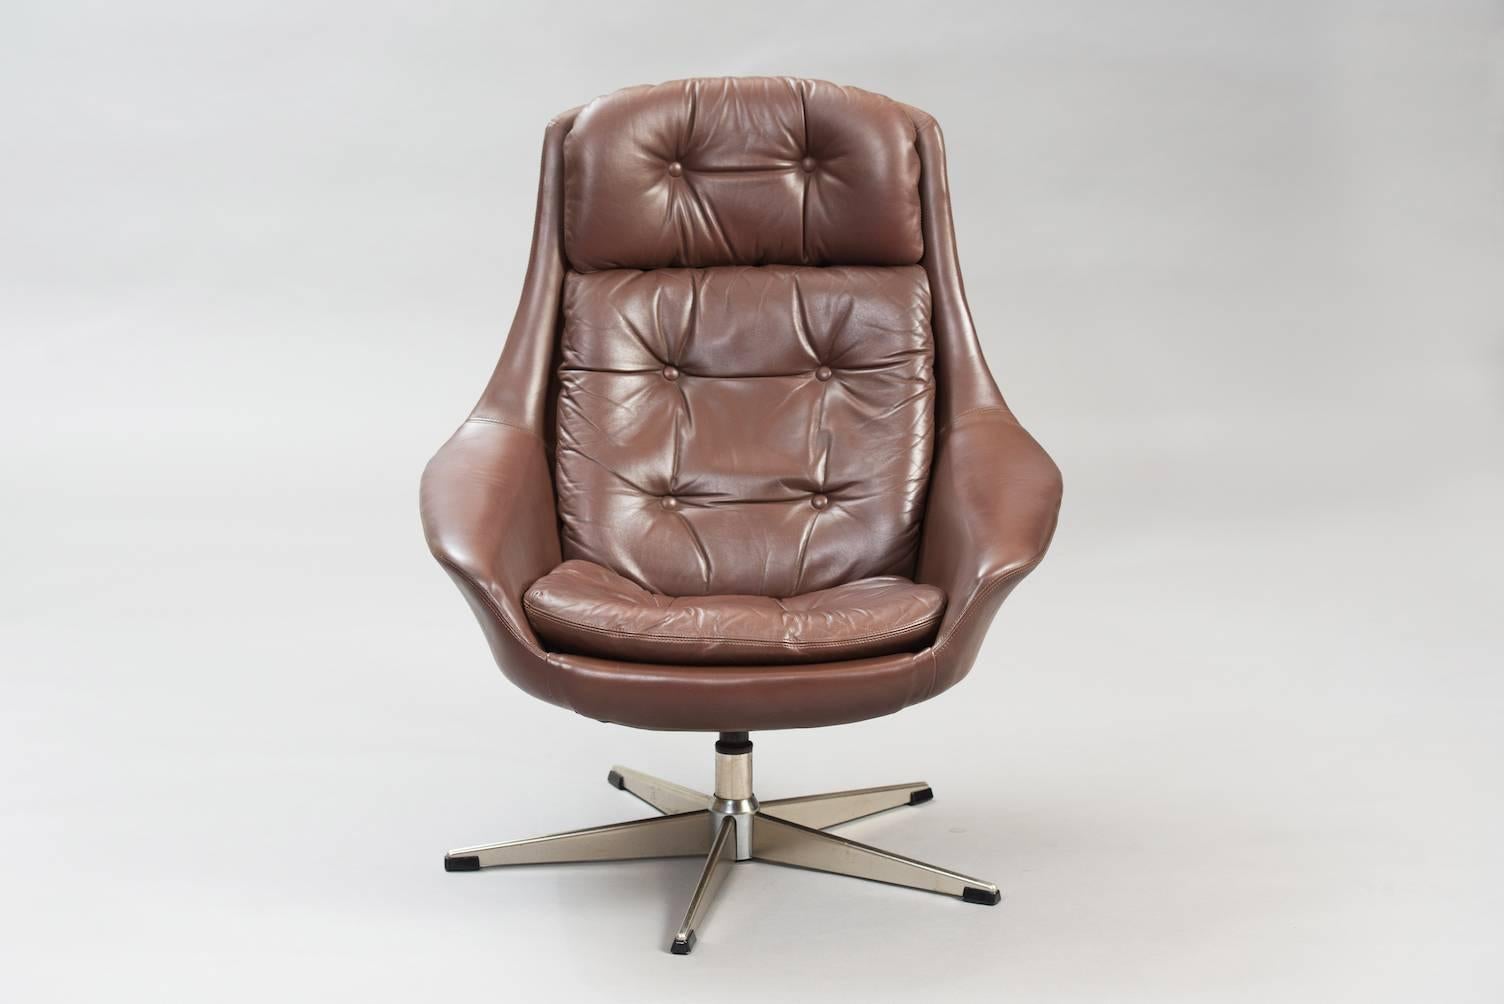 Swivel lounge chair floating on a brushed steel point base, upholstered in brown leather.
Producer: Bramin.